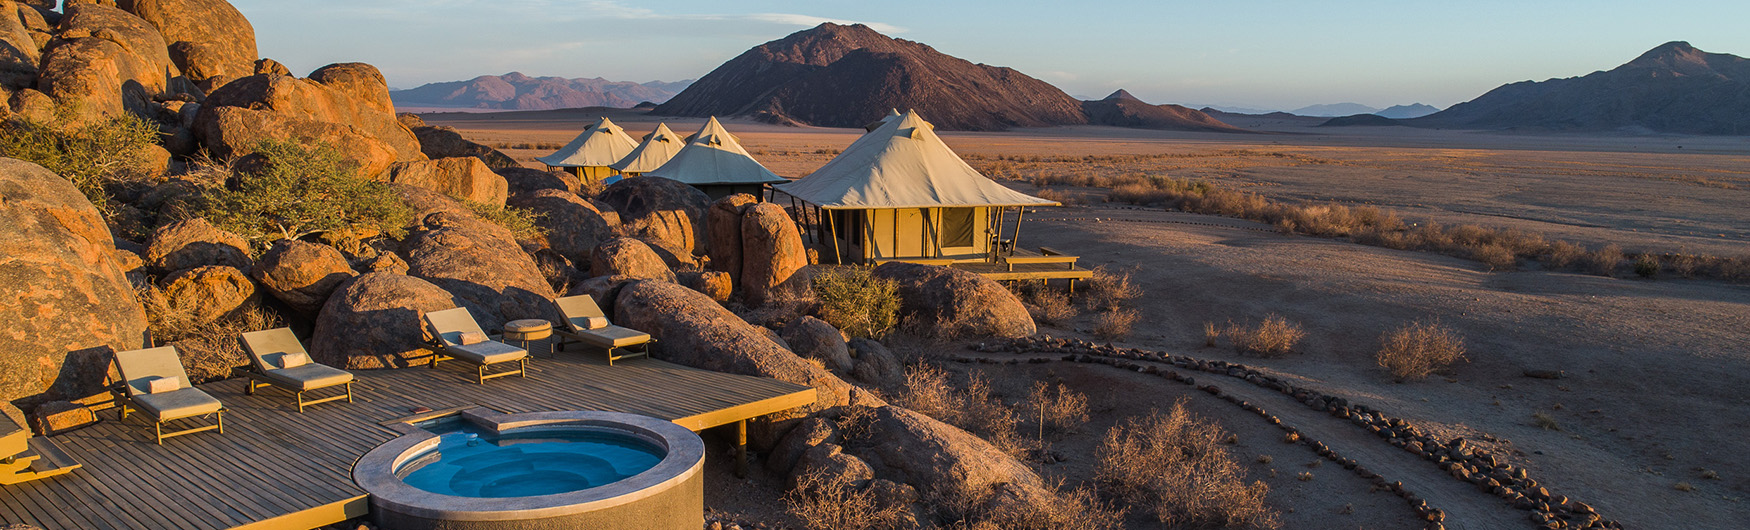 Boulders Camp - Wolwedans - Namibia- Facilities web